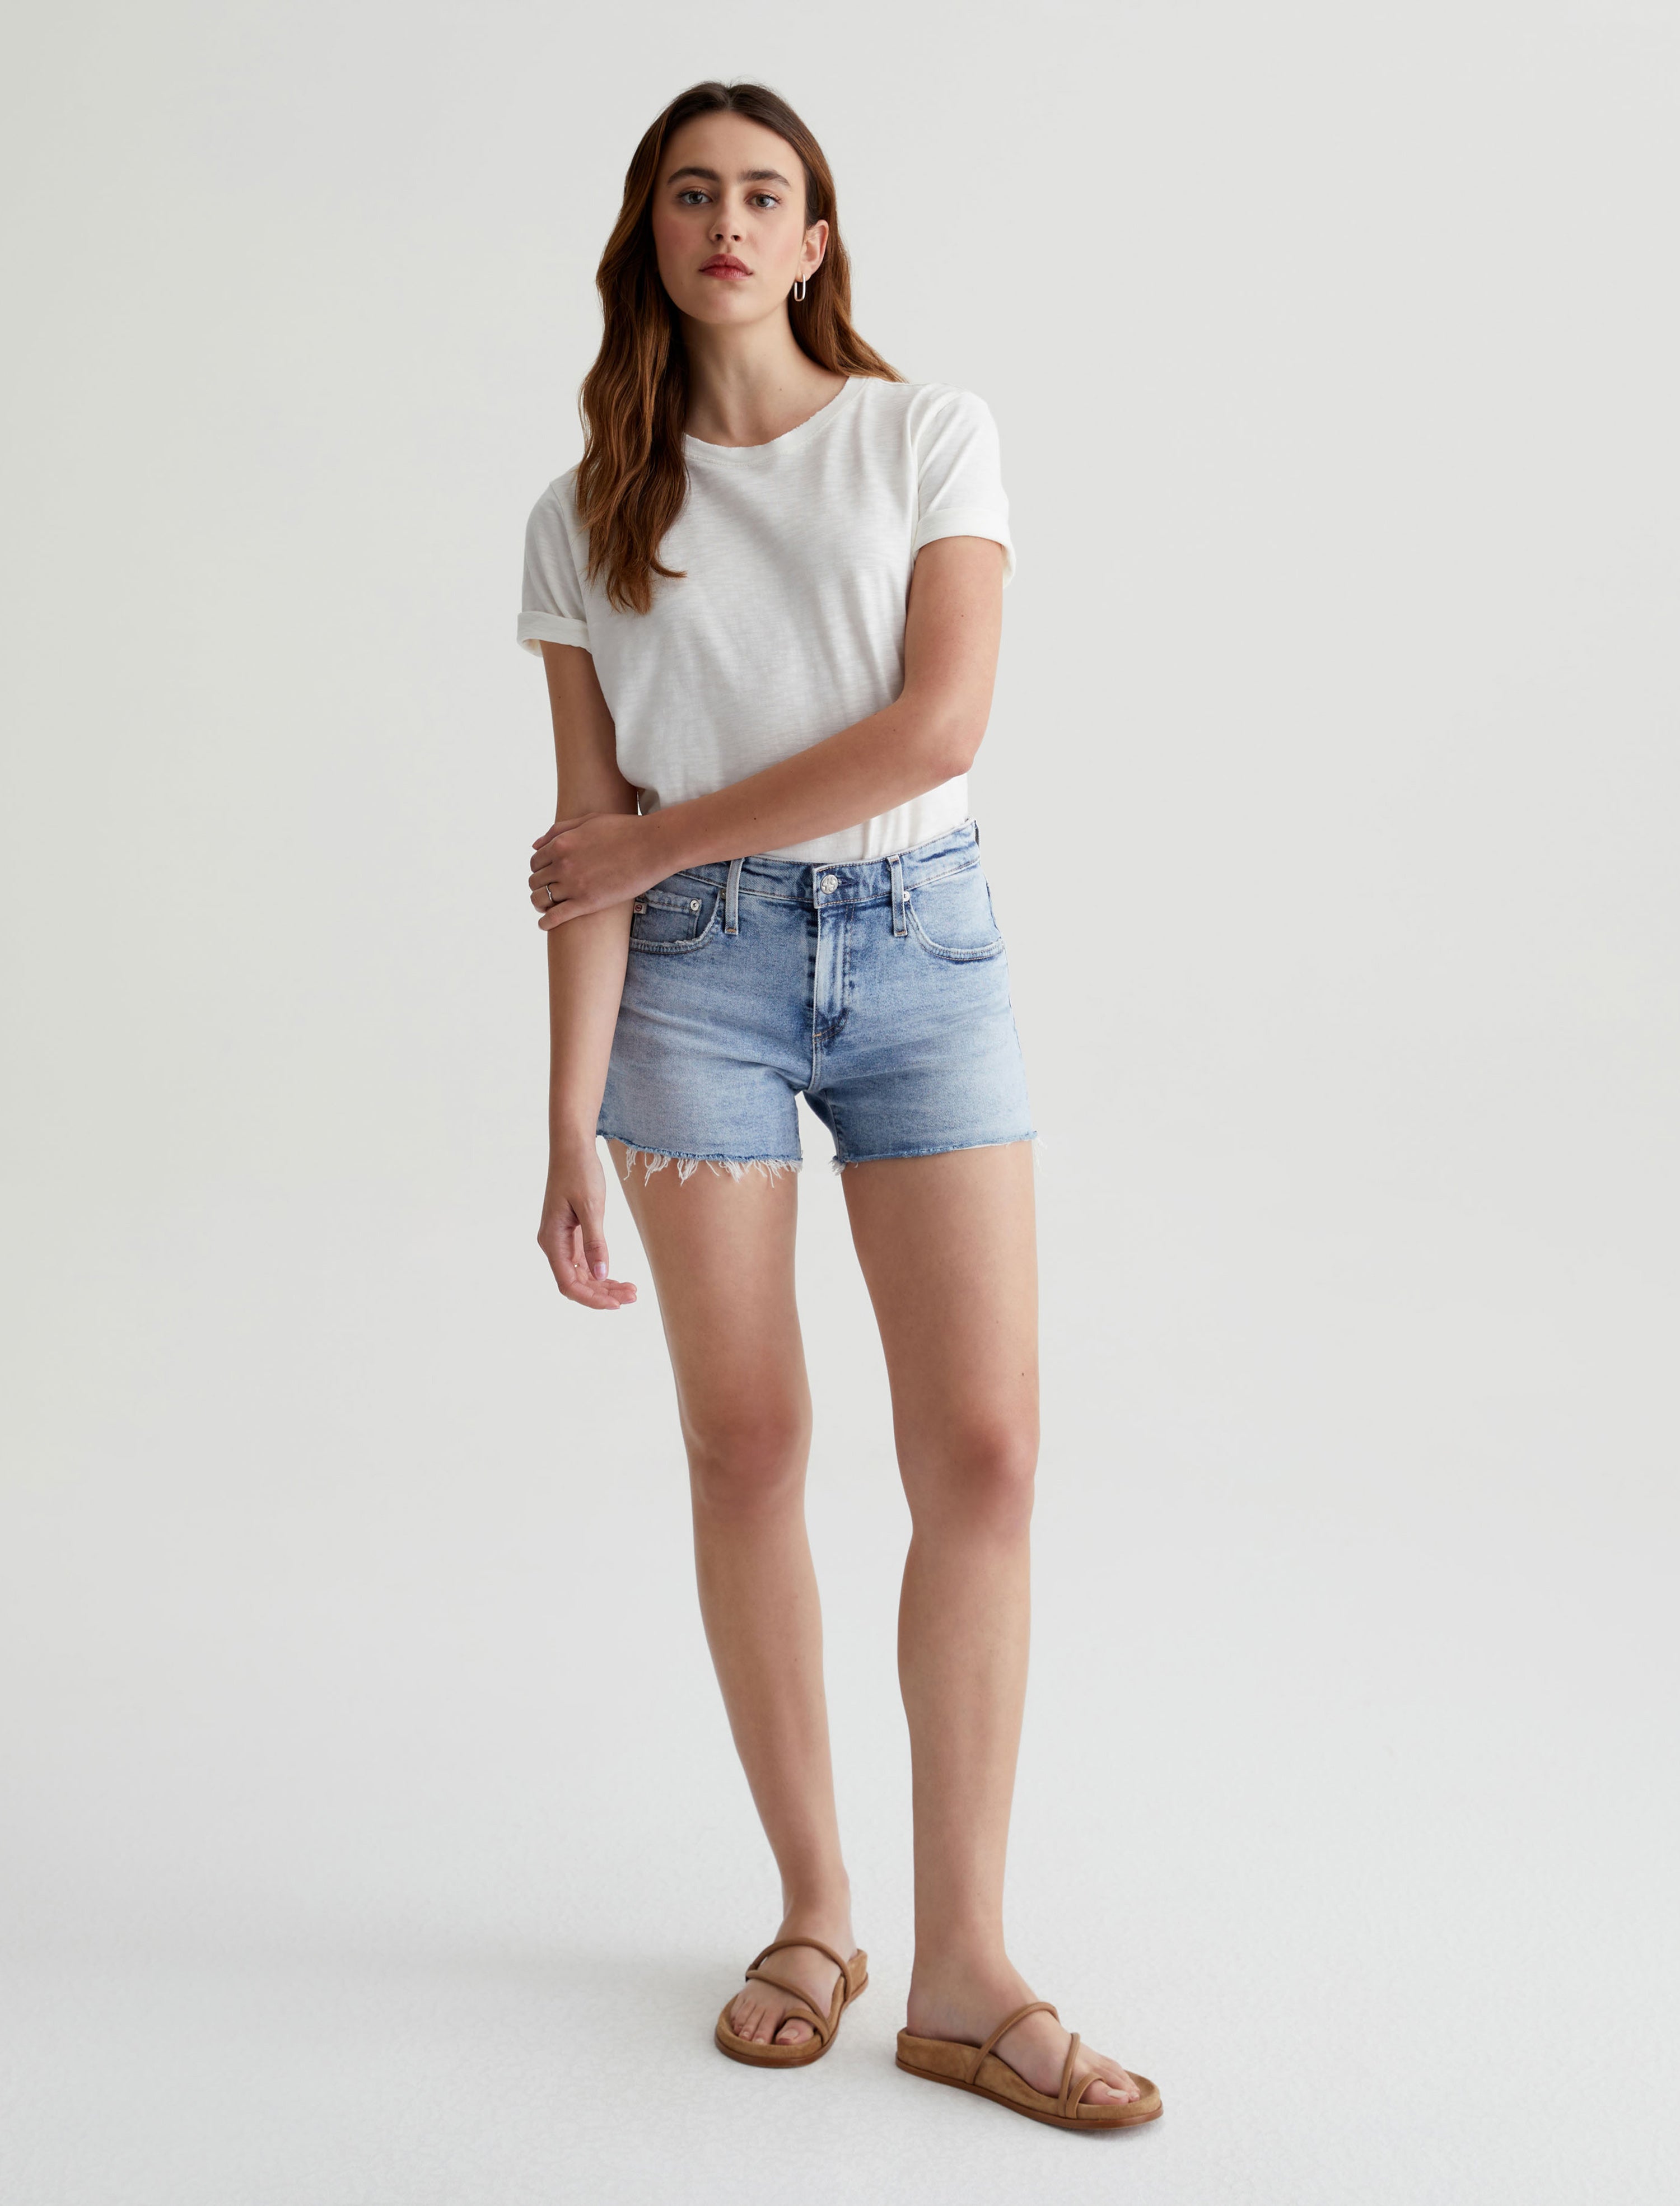 Women's Shorts at AG Jeans Official Store